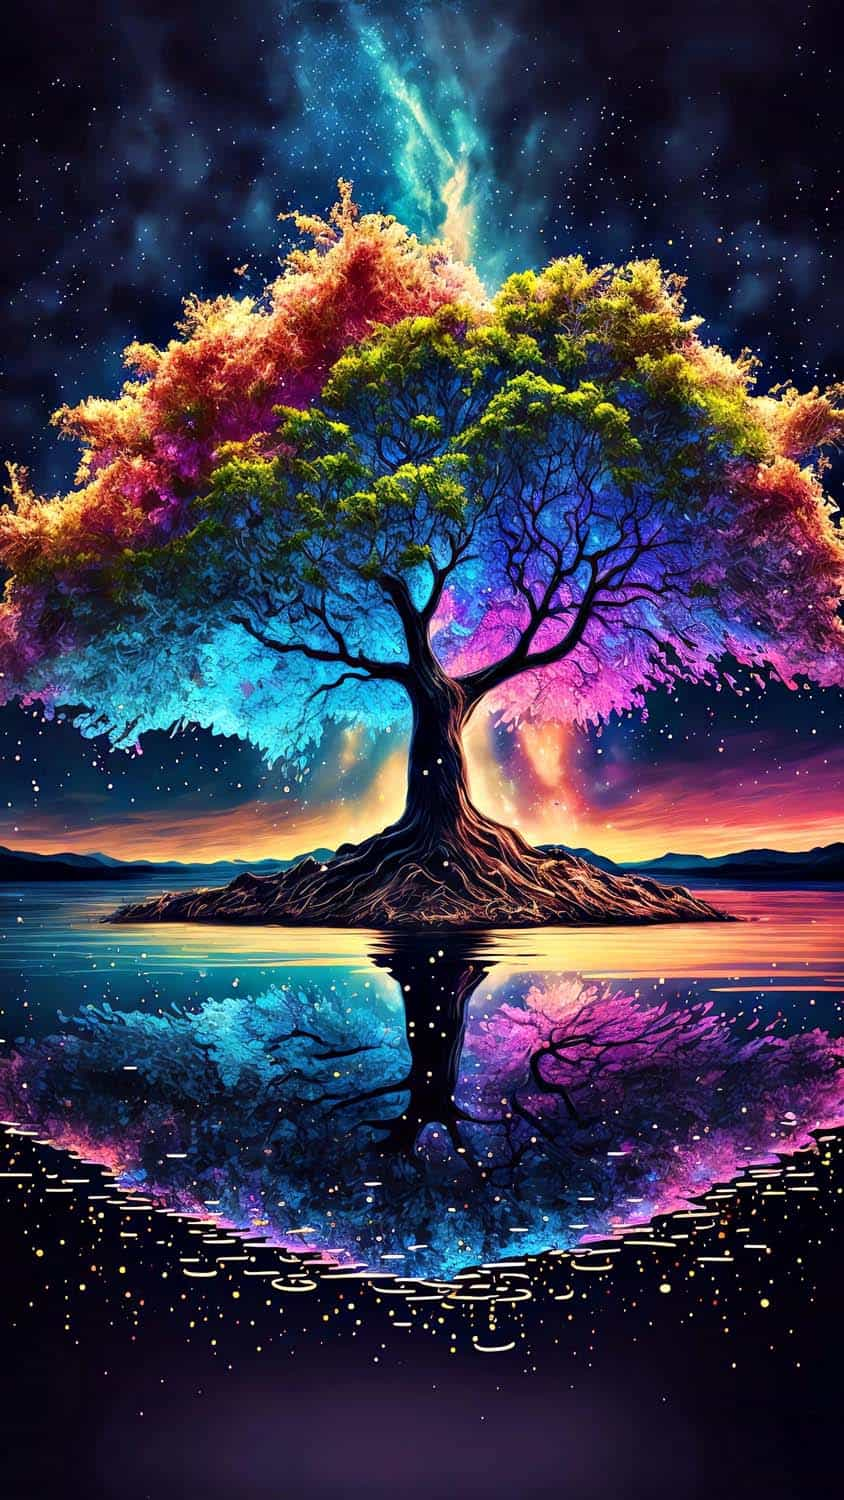 Tree Of Universe IPhone Wallpaper HD  IPhone Wallpapers